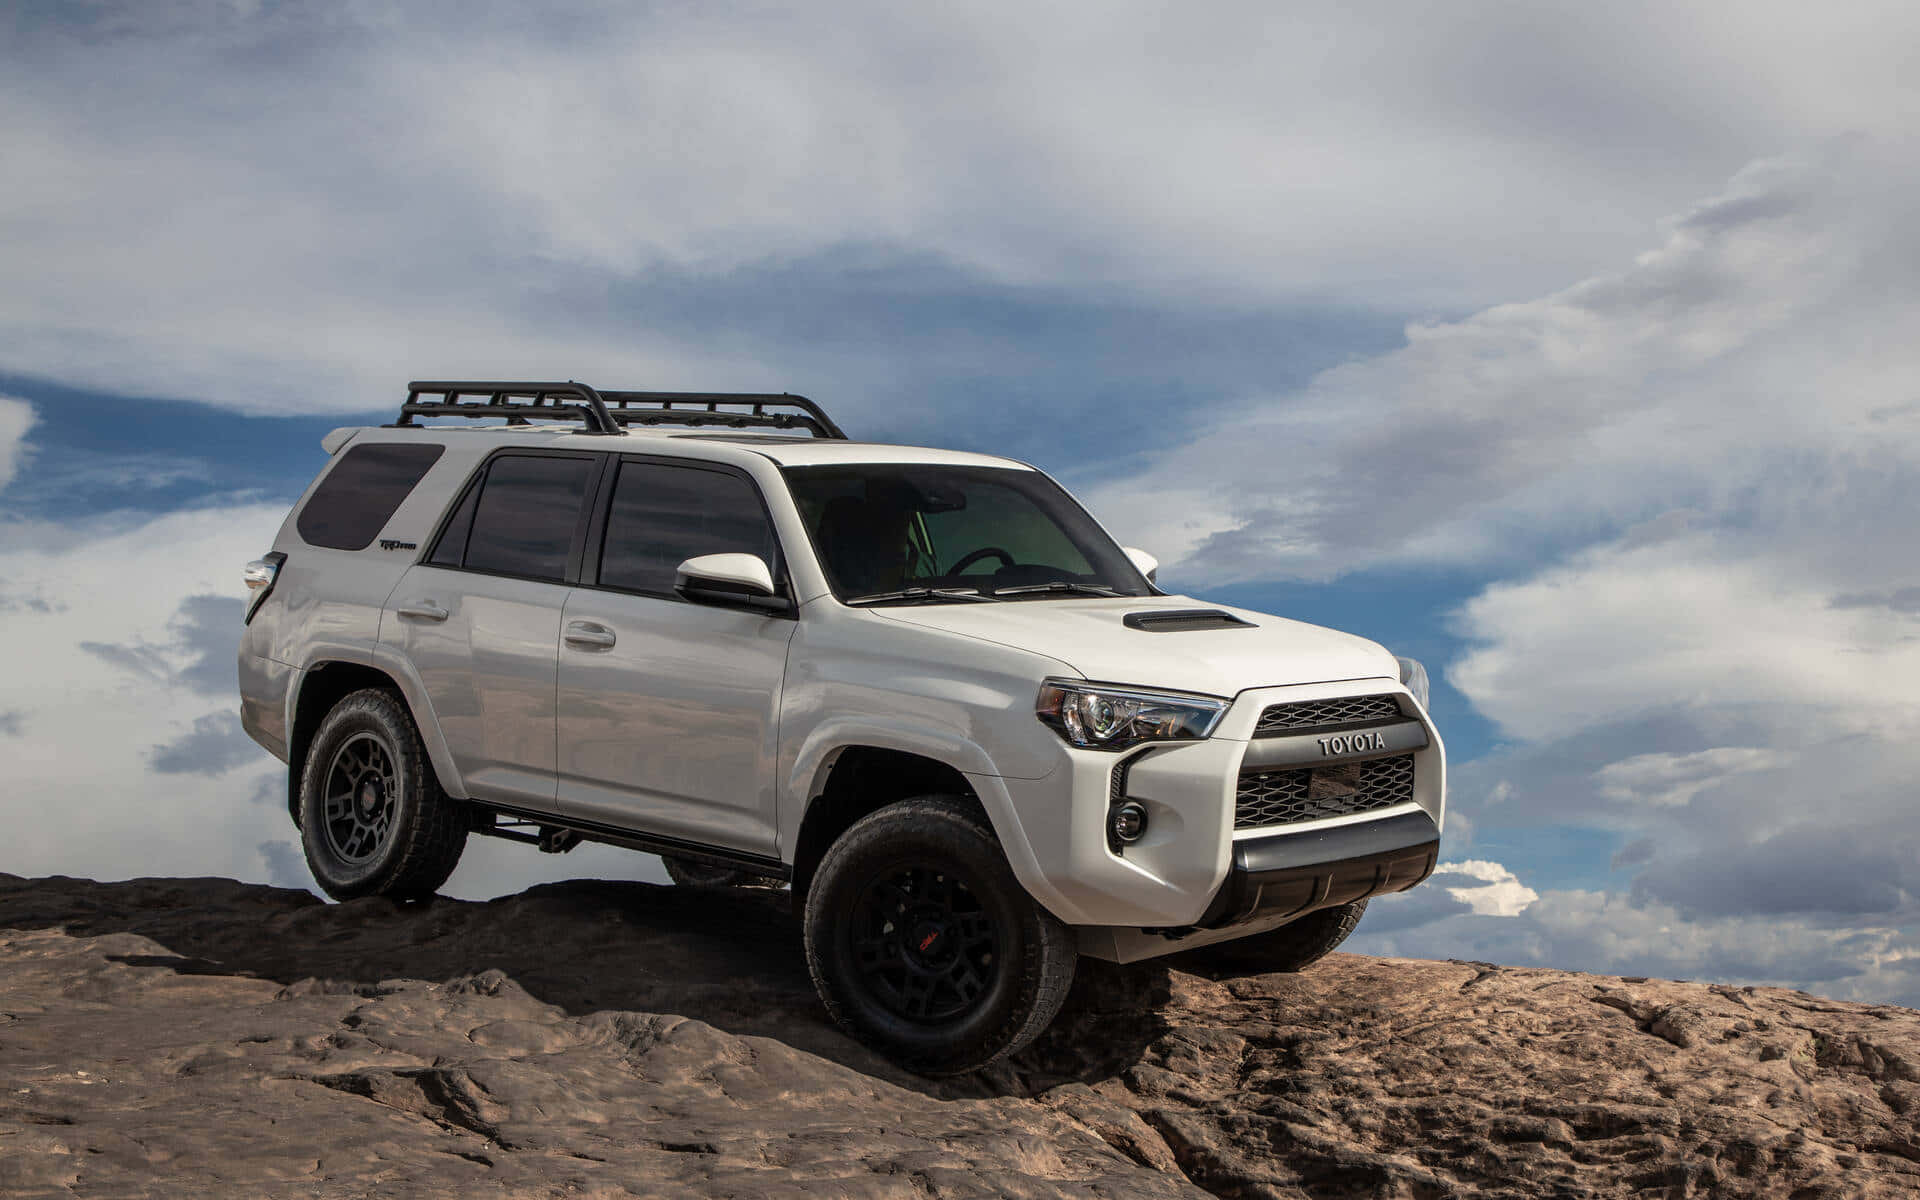 The White 2020 Toyota 4runner Is Parked On A Rocky Hill